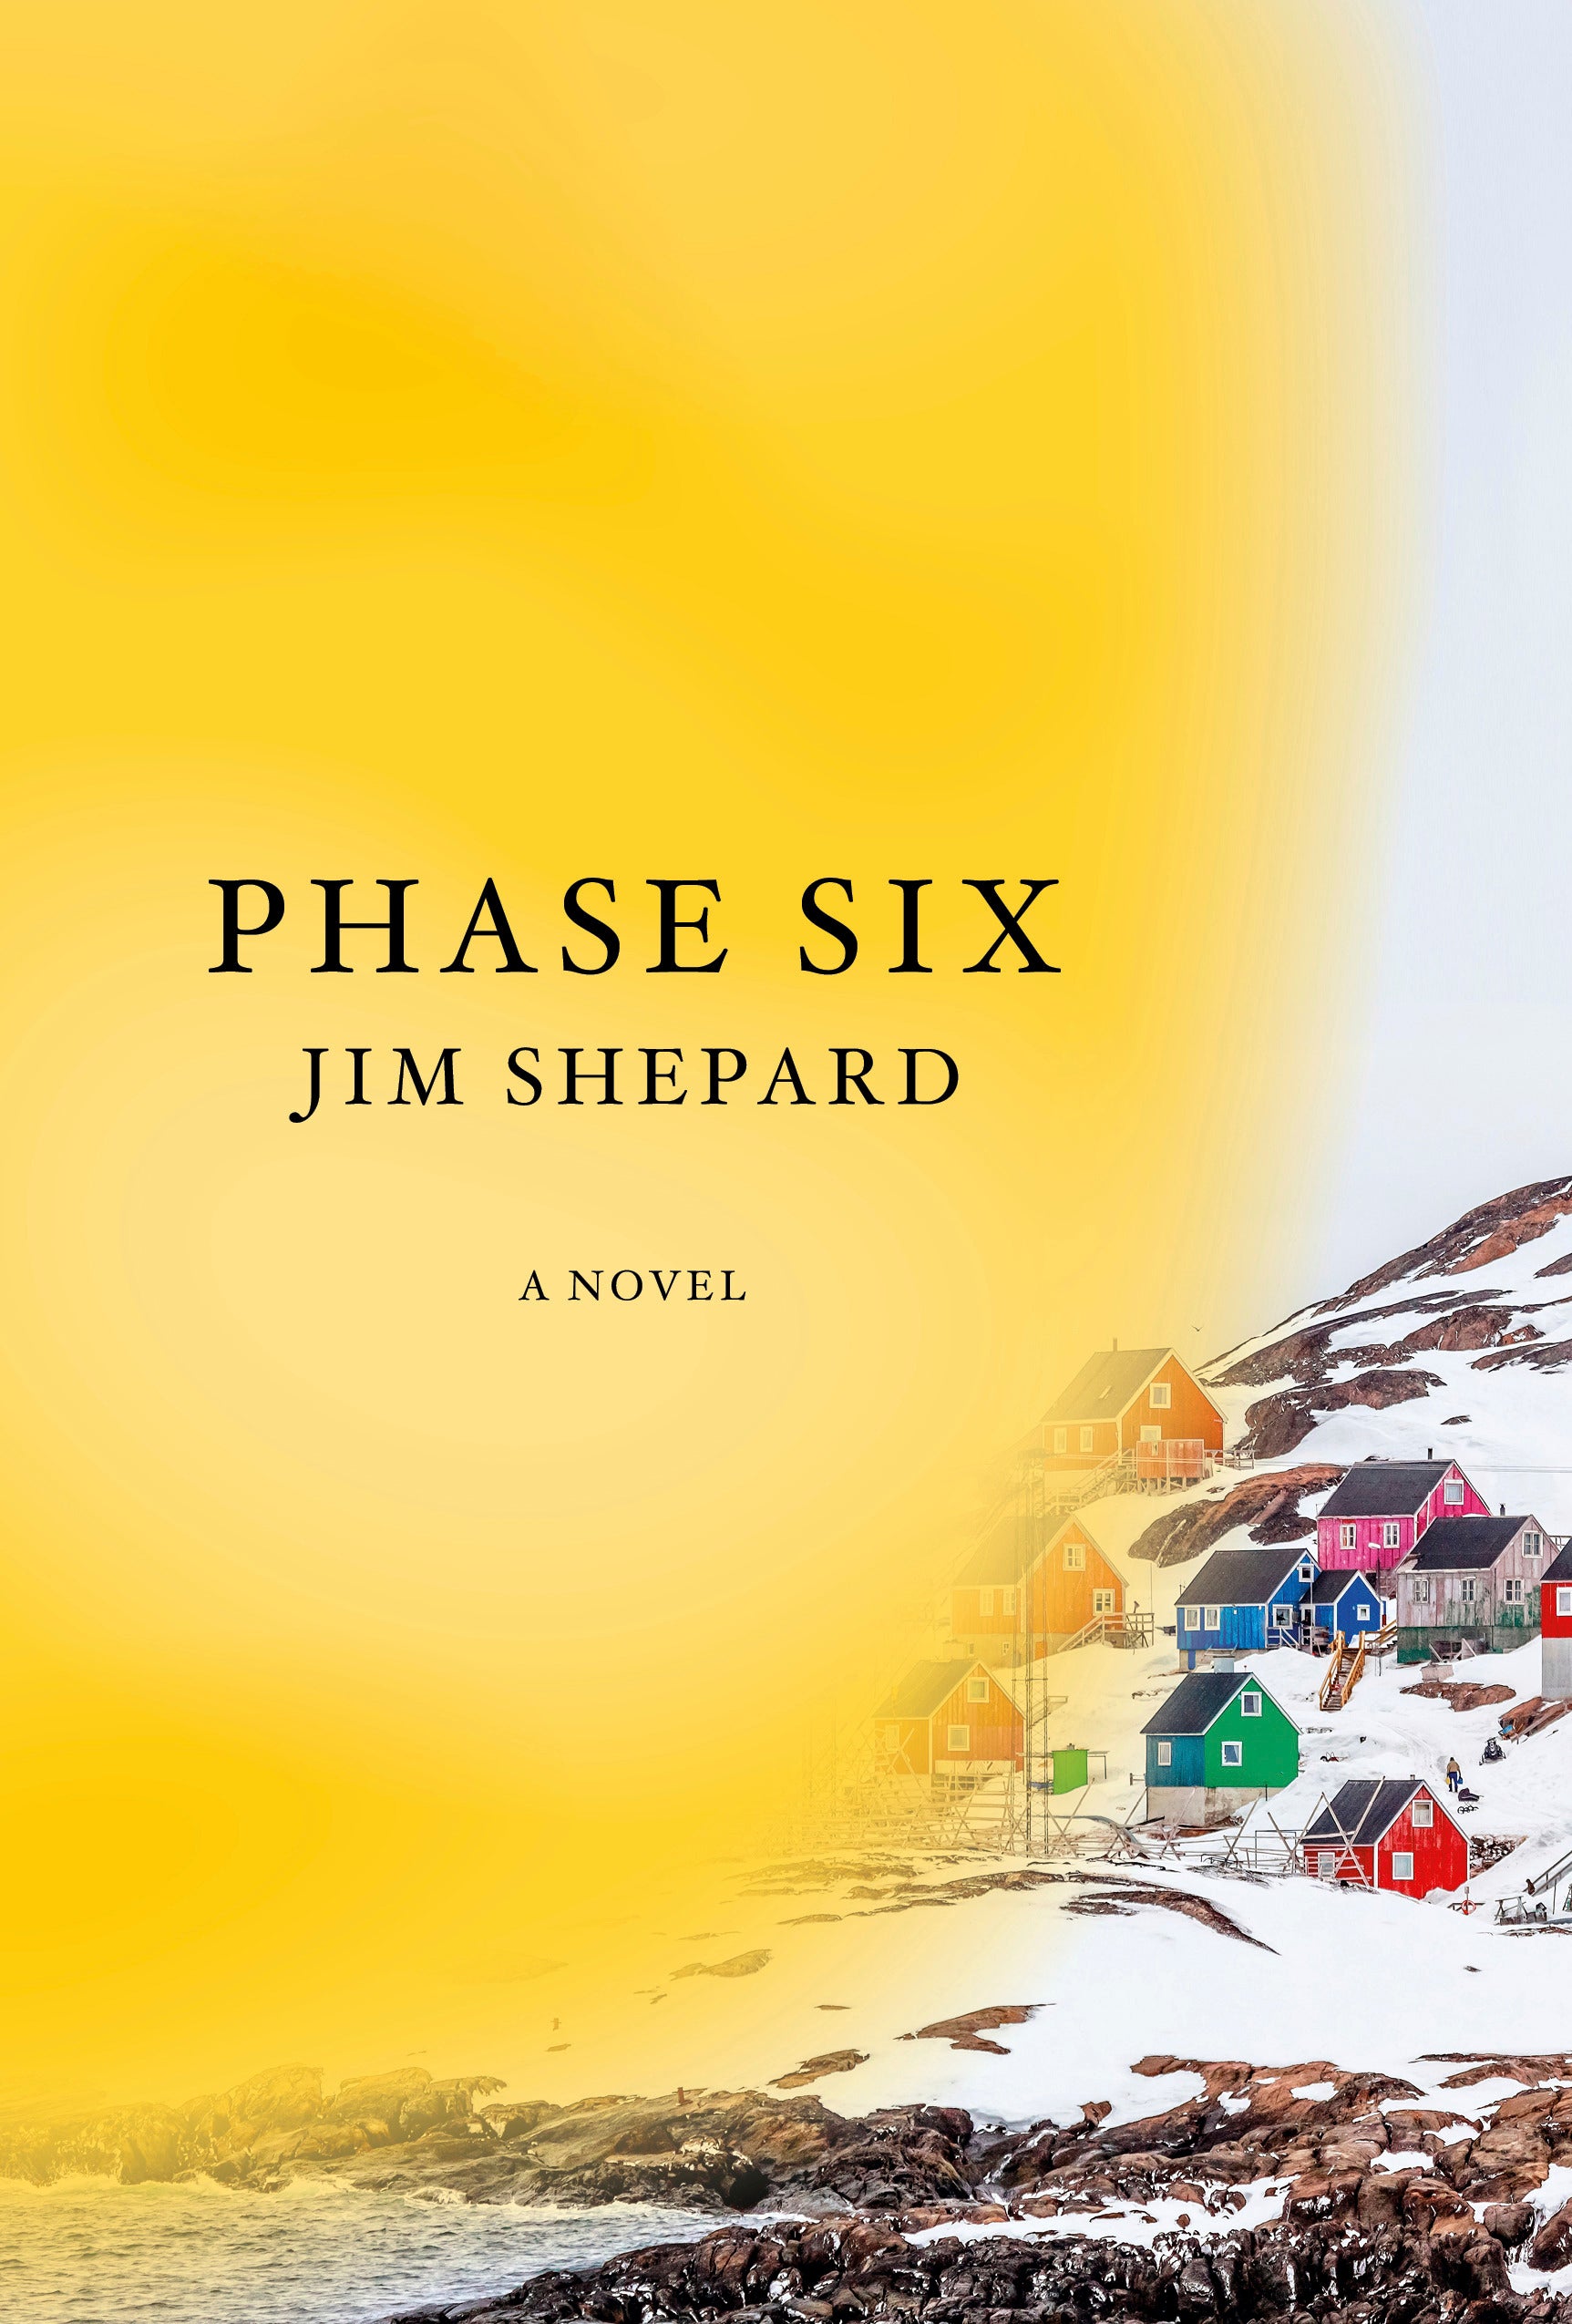 Book Review - Phase Six